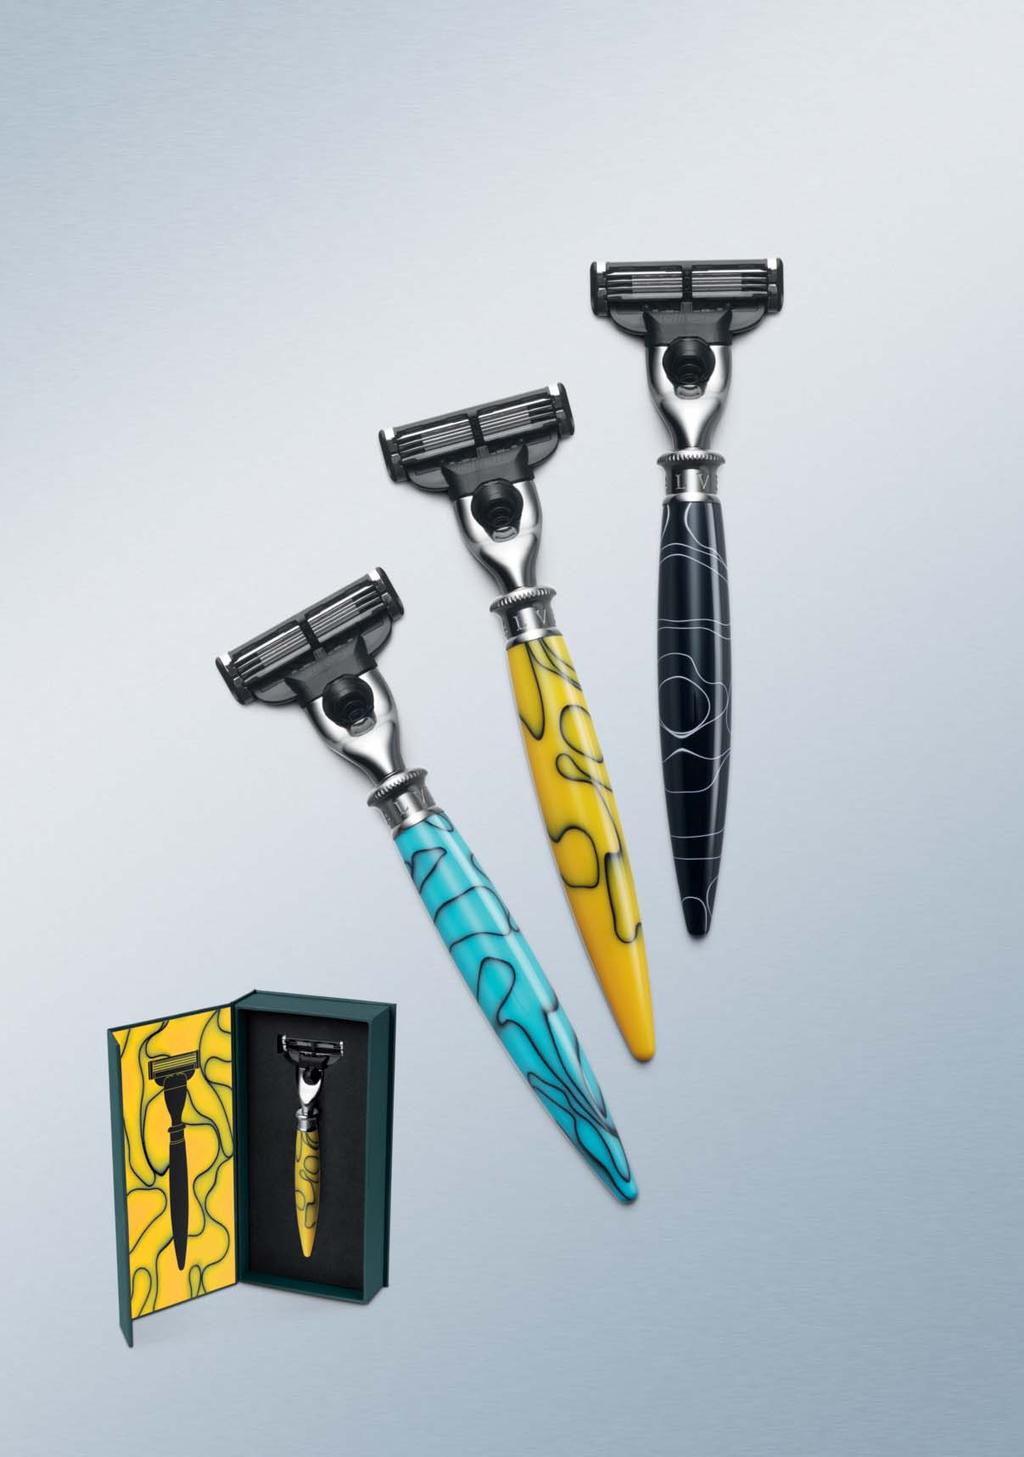 ARTISAN RAZORS The Artisan Razors have been designed as the perfect men s gifts, incorporating visually stunning and individually unique resins, beautifully finished stainless